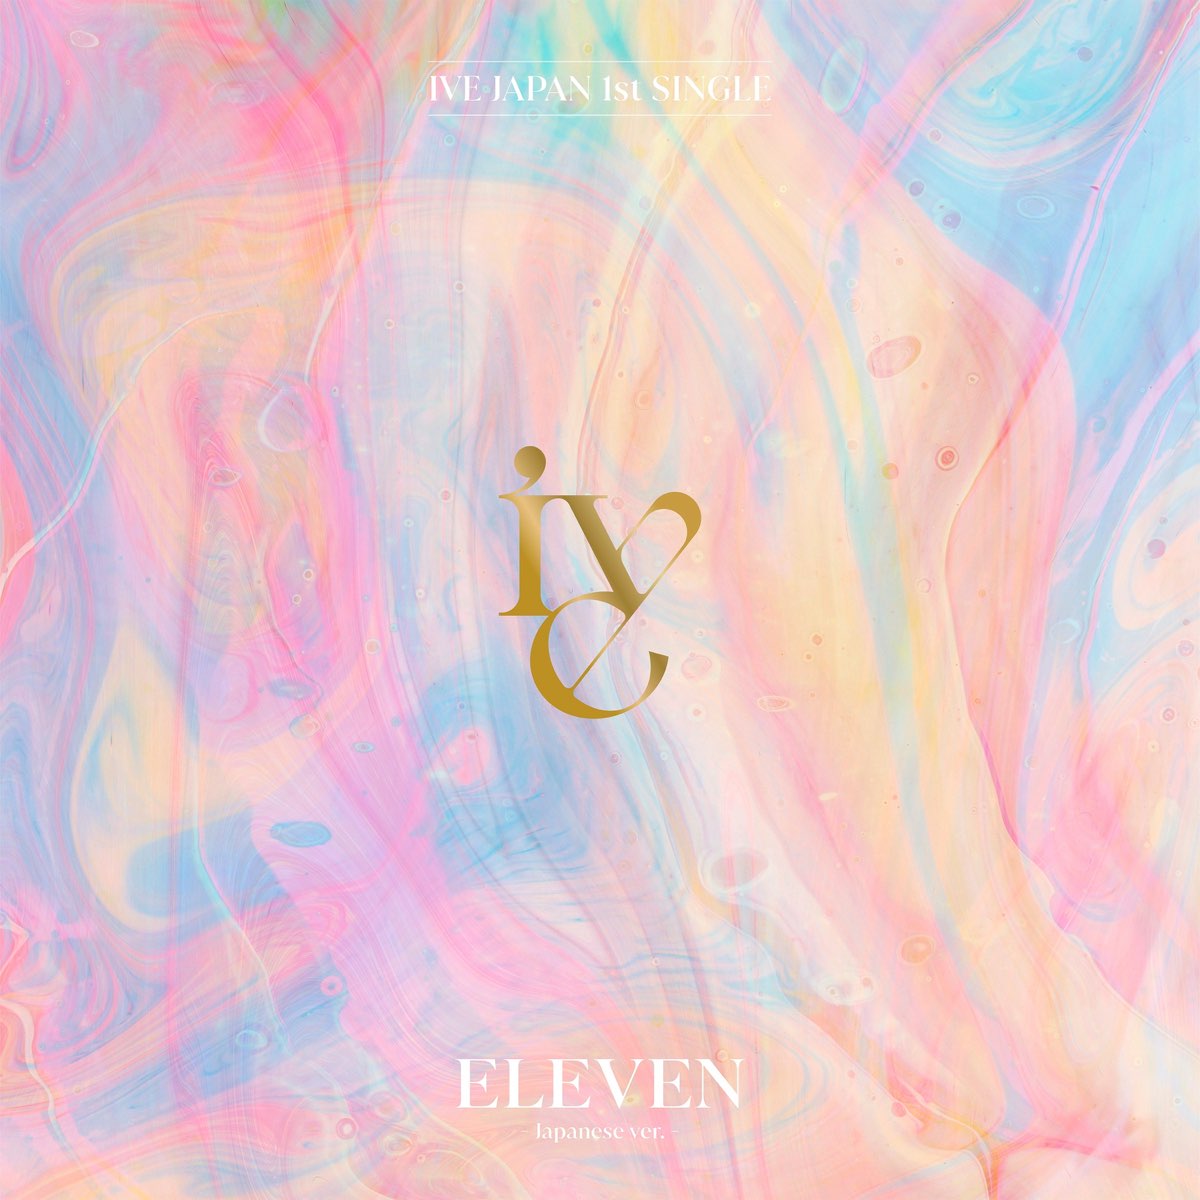 IVE gear up for their debut with teaser for first-ever single, ‘Eleven’